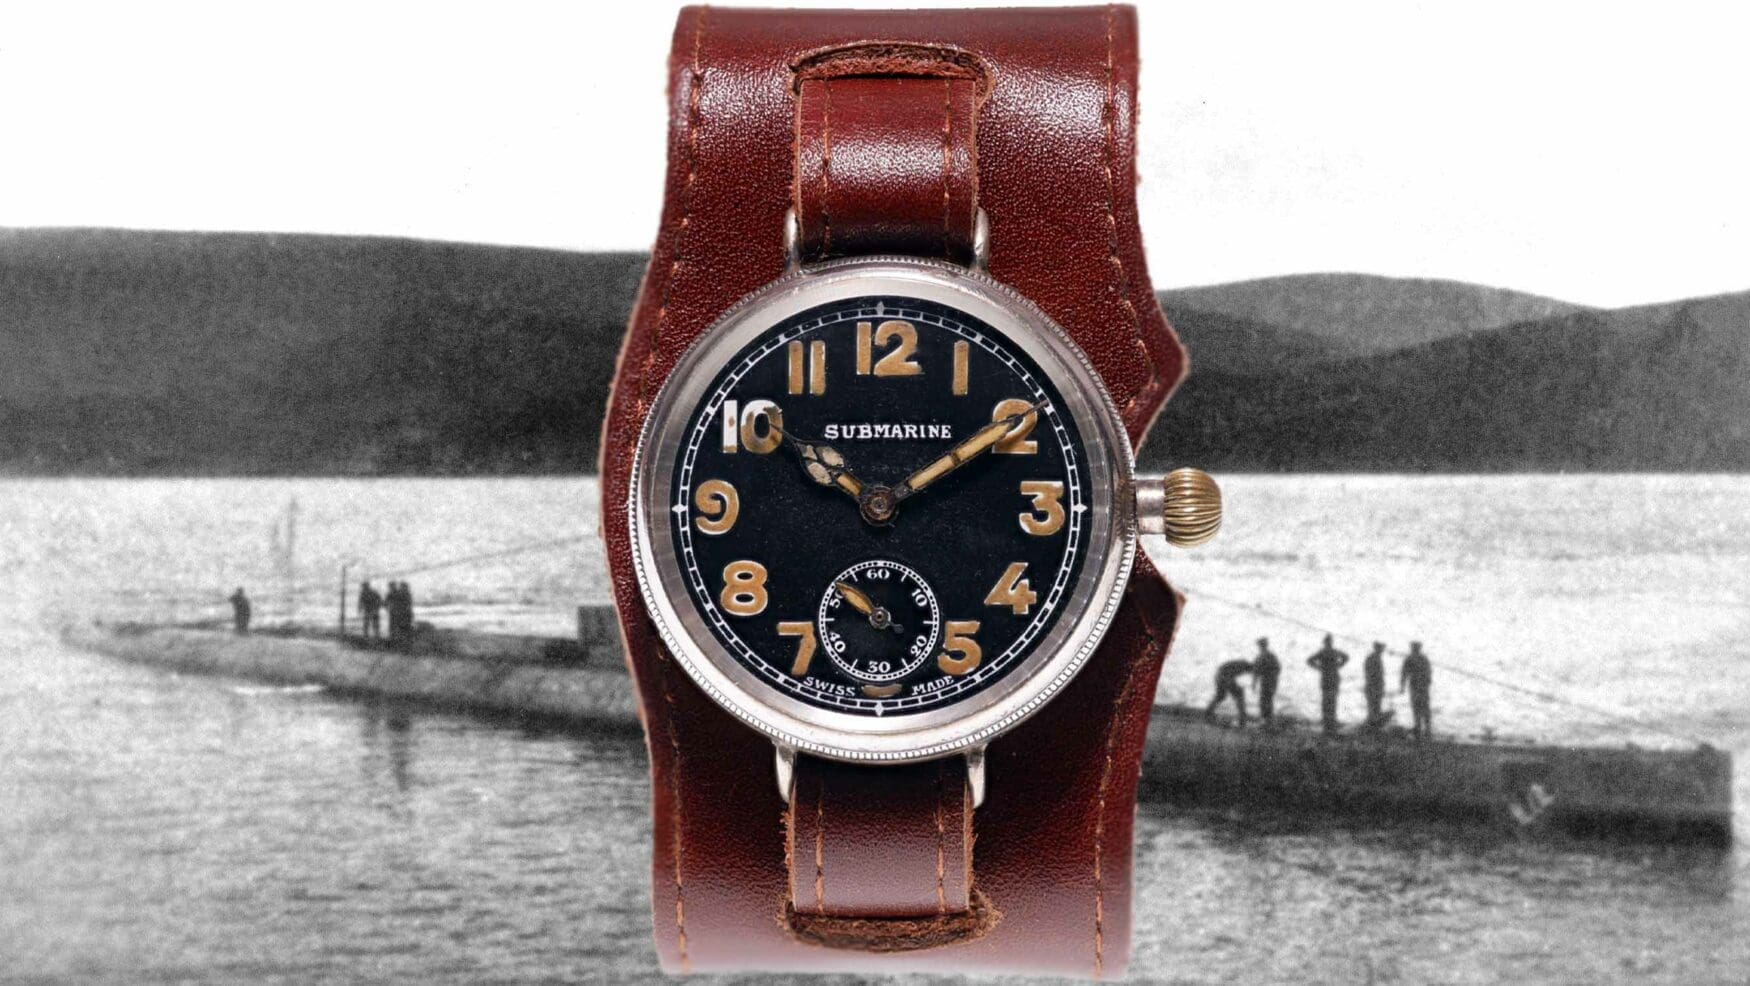 Could this obscure Submarine have been the first waterproof wristwatch?